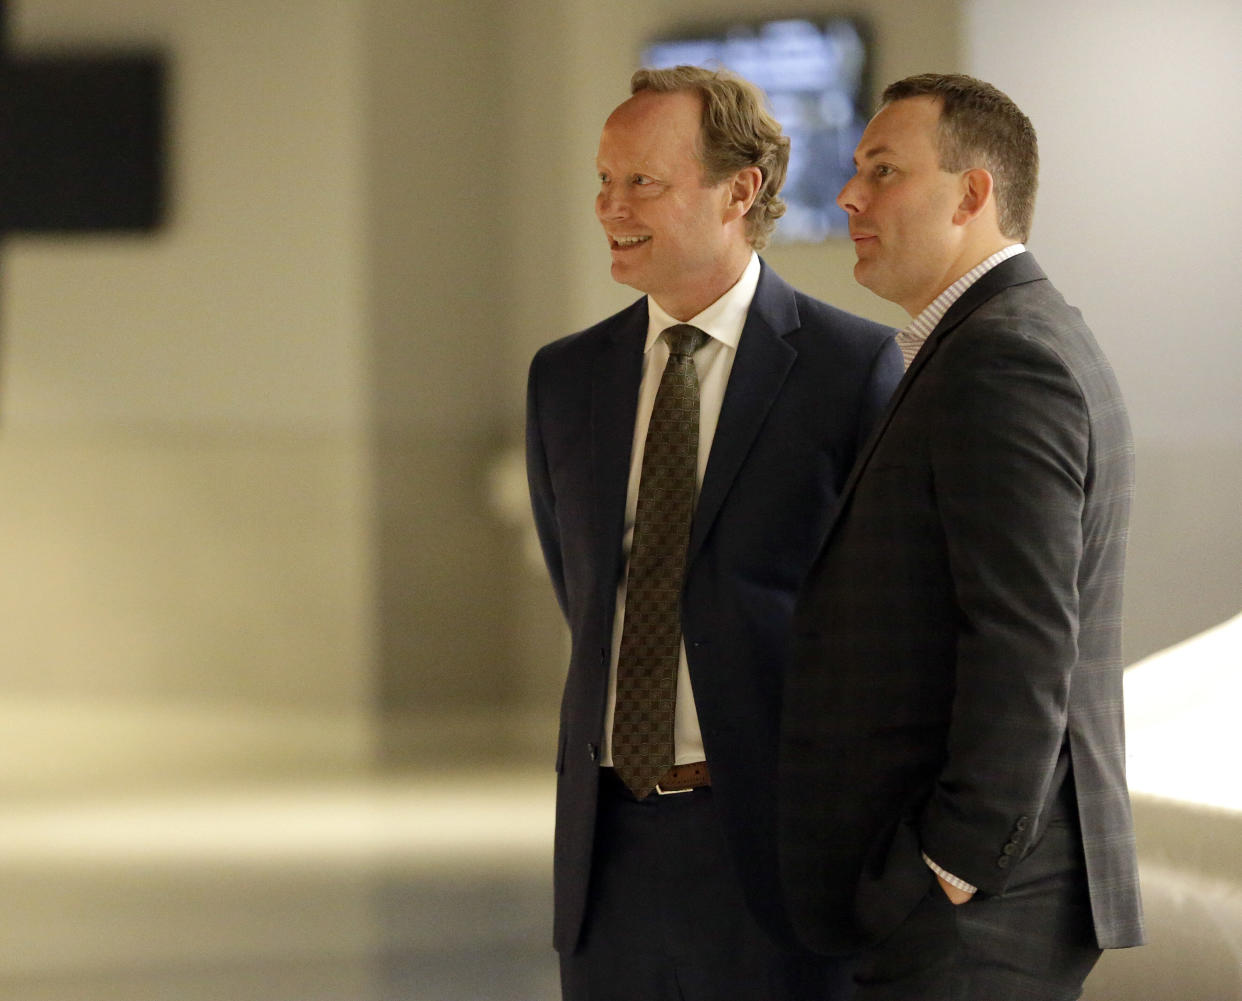 Milwaukee Bucks new head coach Mike Budenholzer speaks with general manager Jon Horst at a news conference in the team's new arena Monday, May 21, 2018, in Milwaukee. (AP Photo/Aaron Gash)